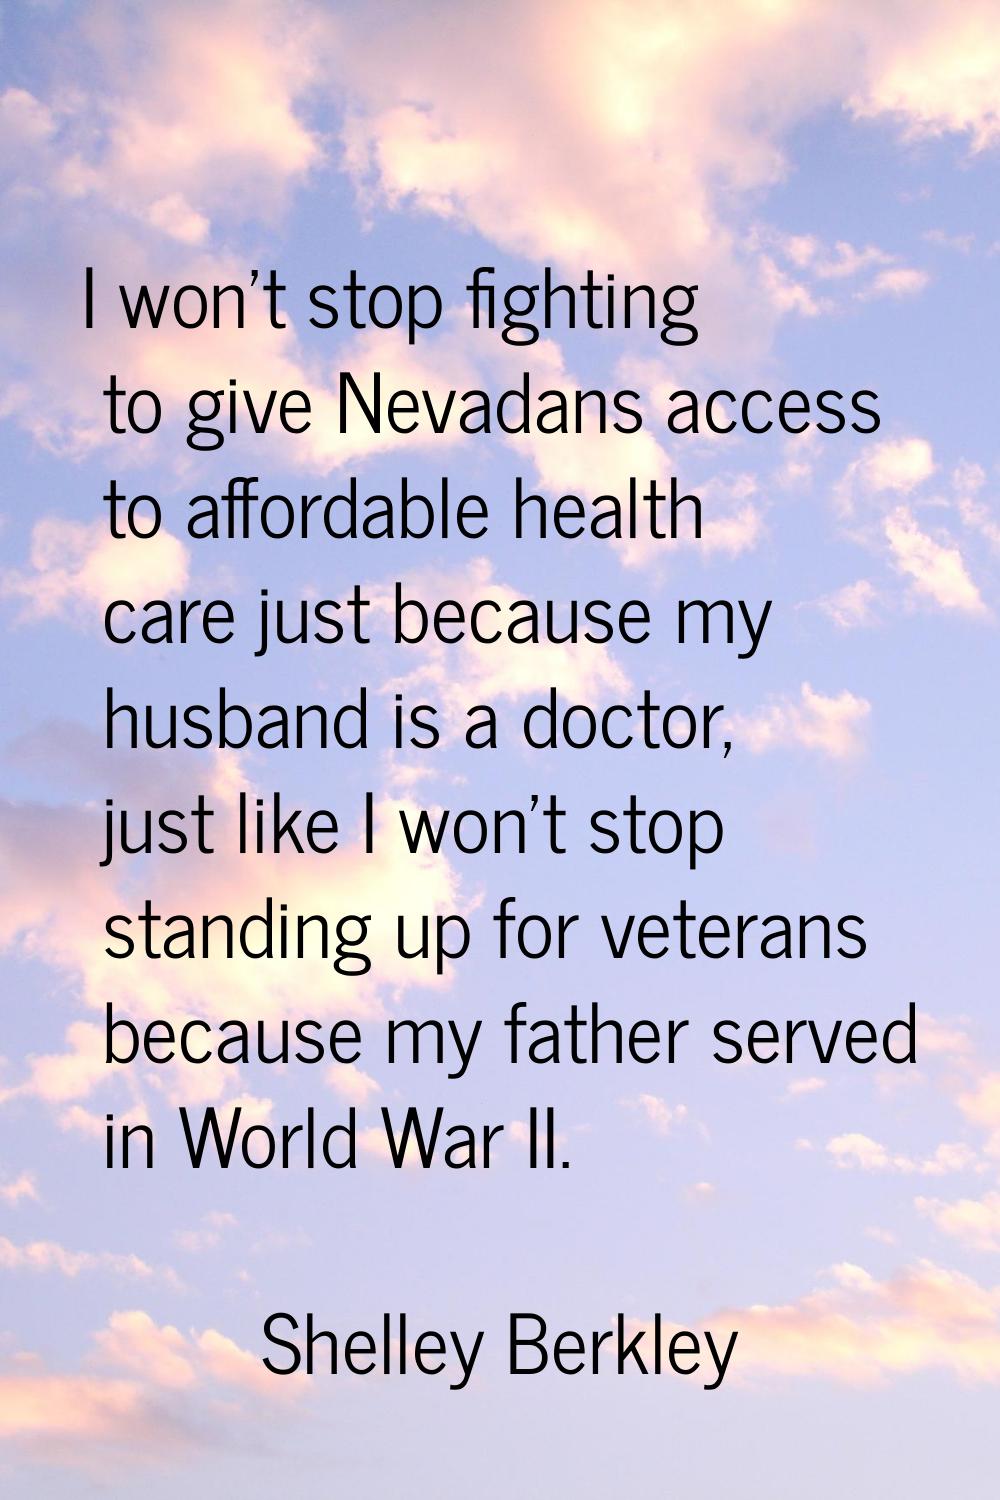 I won't stop fighting to give Nevadans access to affordable health care just because my husband is 